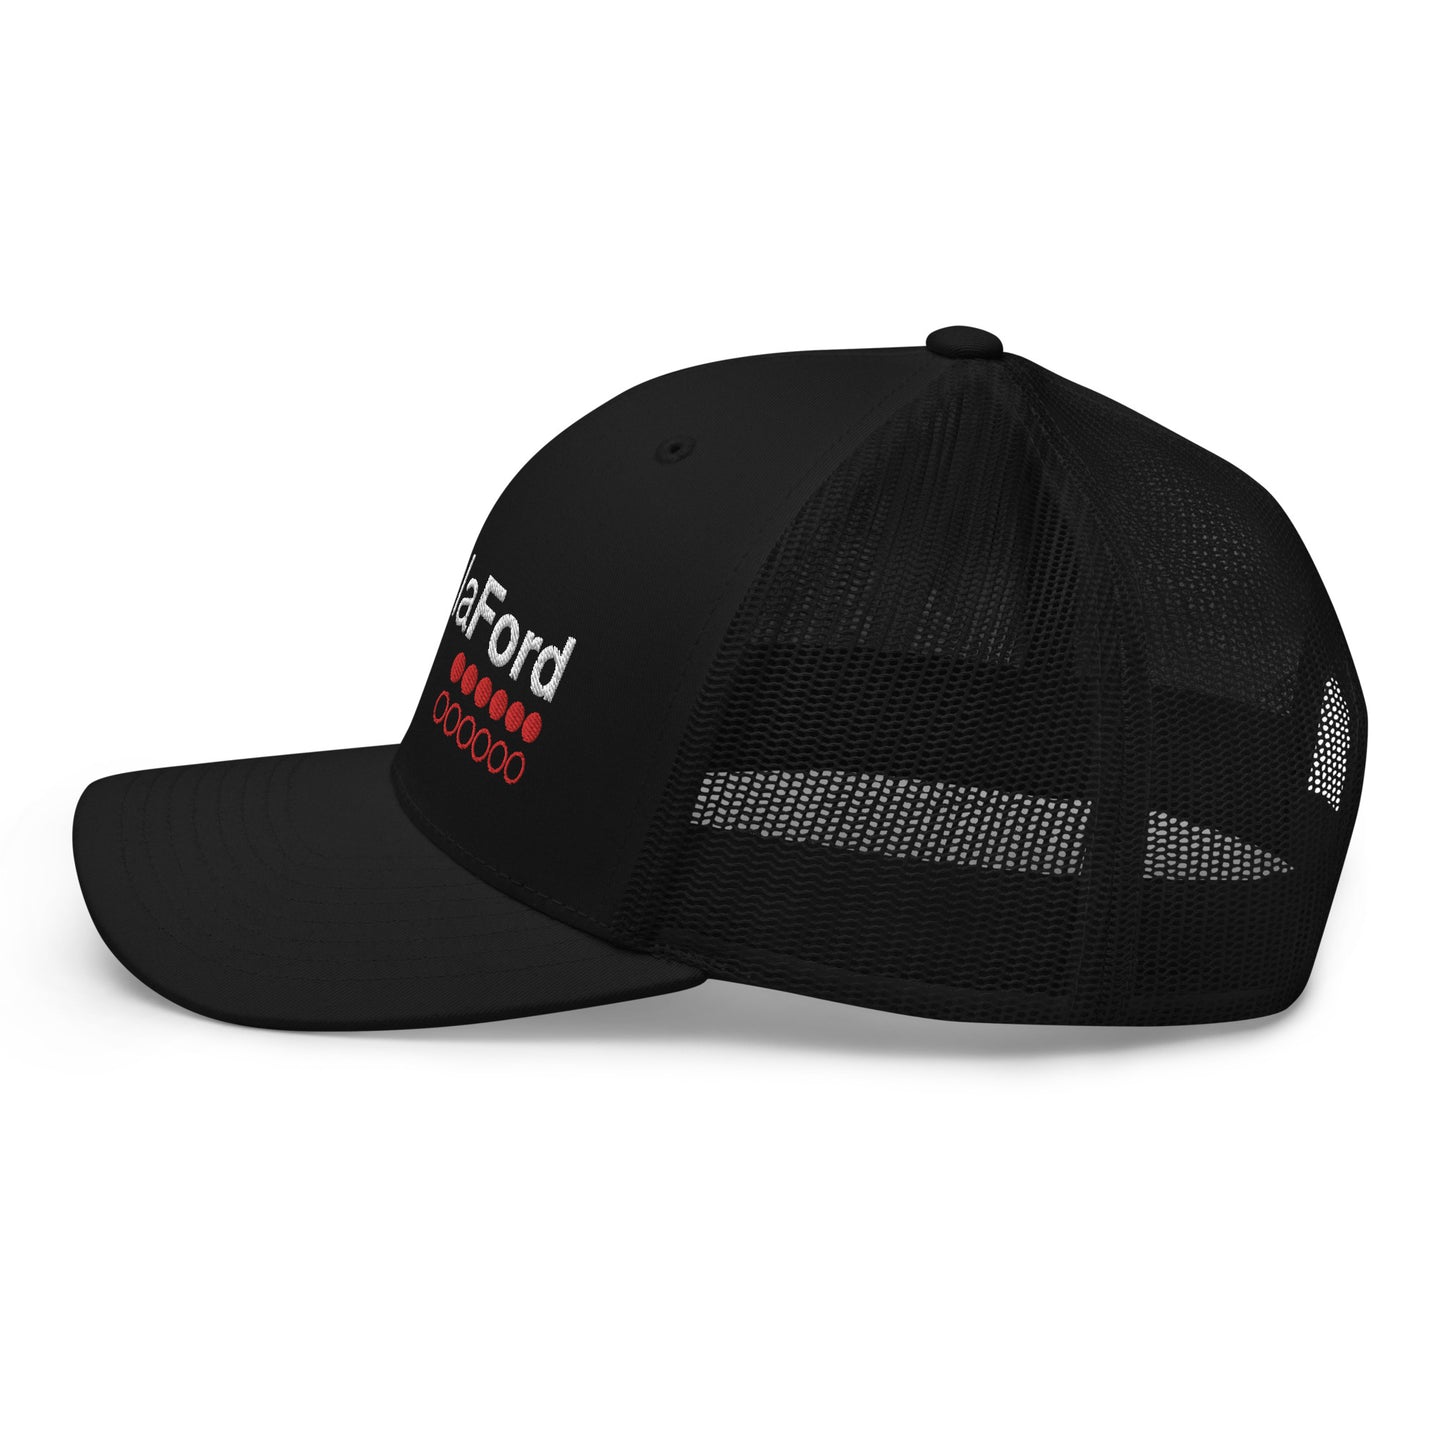 FORMULA FORD Official Embroidered Trucker Cap - full carbon